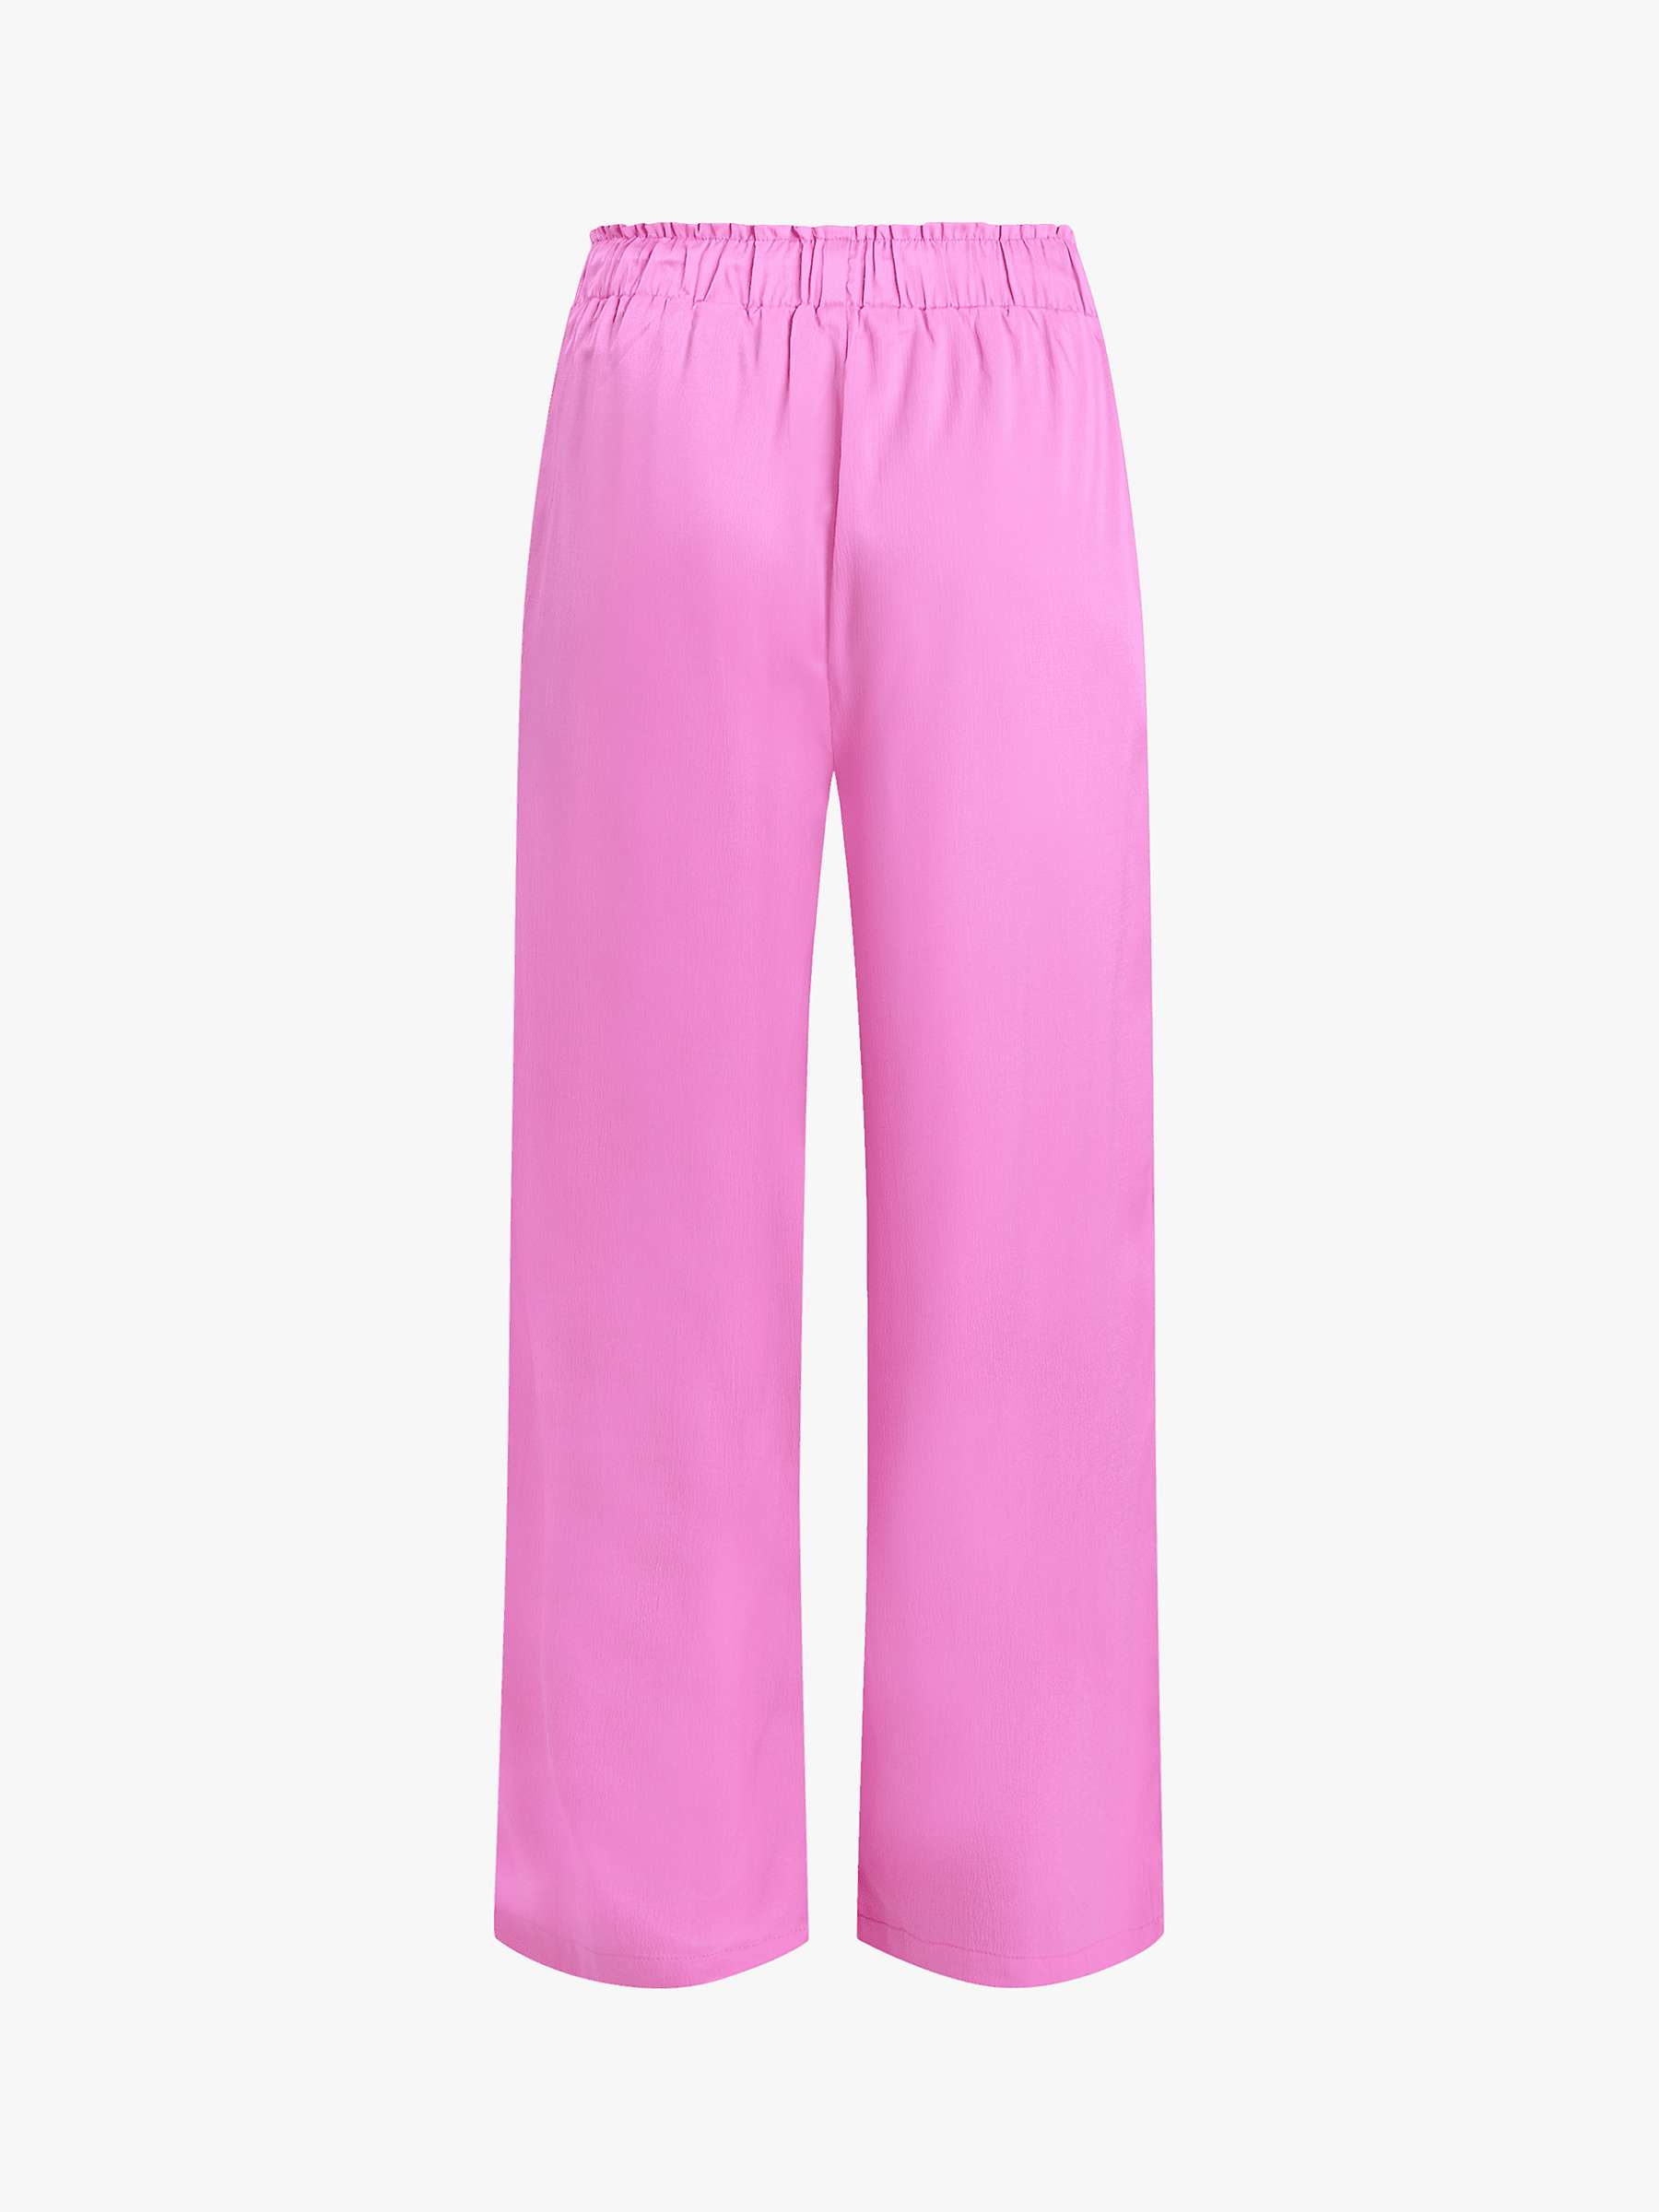 Buy Sisters Point Visola String Tie Satin Trousers Online at johnlewis.com